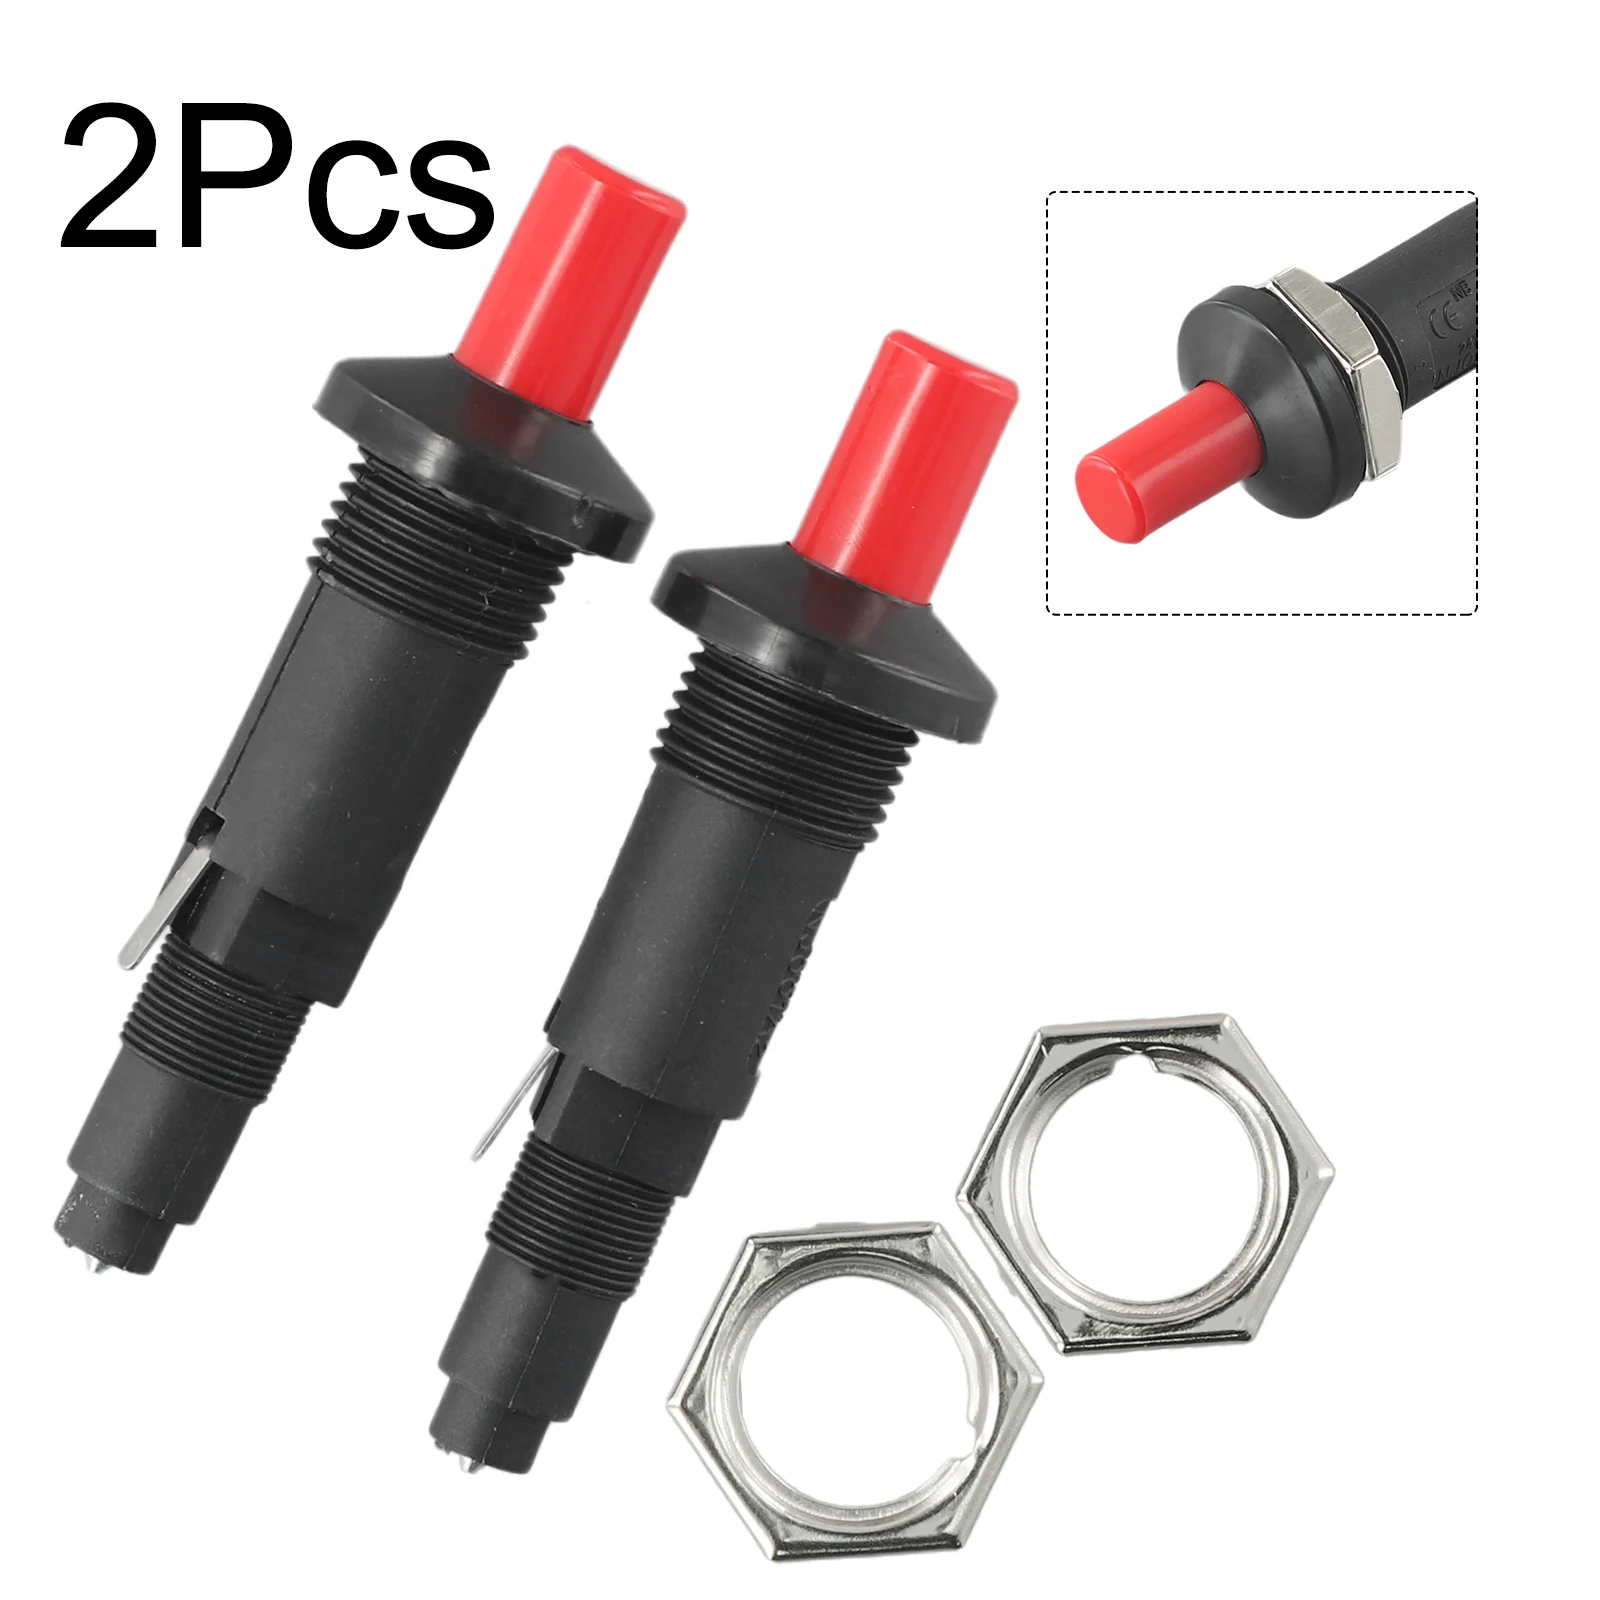 

Brand New High Quality Practical Gas Heater Spark Plug 2PCS Length 9cm Piezo Igniter Push Button Replacement Parts